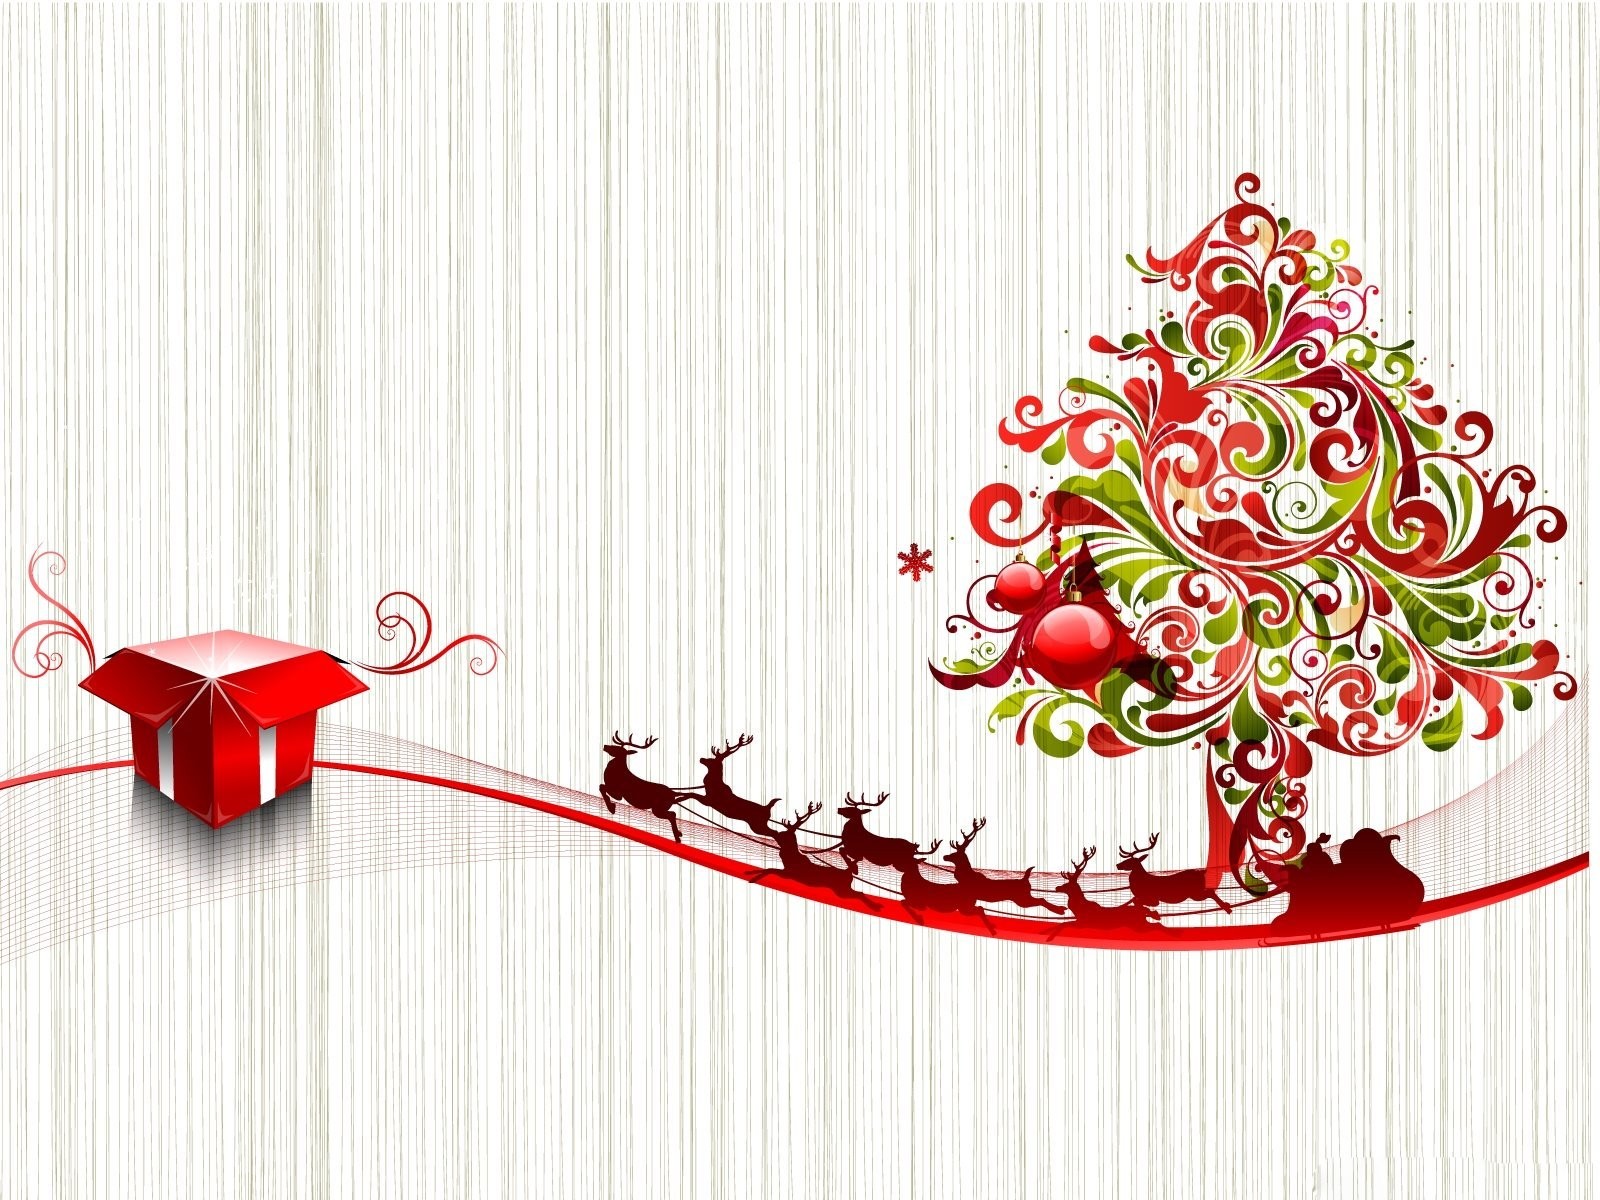 Merry Christmas Creative Wishes - HD Wallpaper 